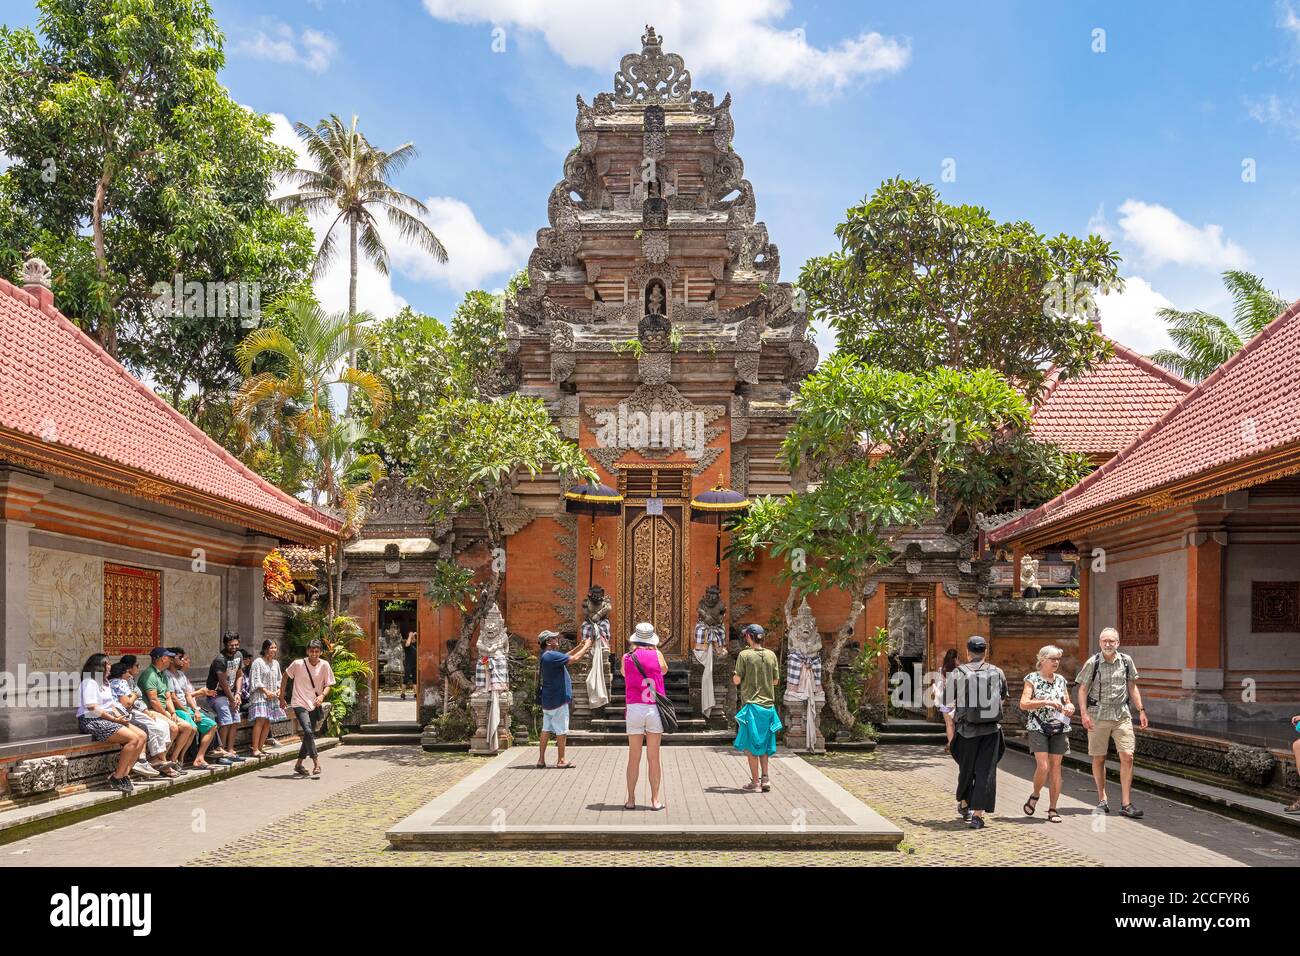 The Ubud Palace, officially Puri Saren Agung, is a historical building  complex situated in Ubud, Gianyar Regency of Bali, Indonesia. The palace  was th Stock Photo - Alamy